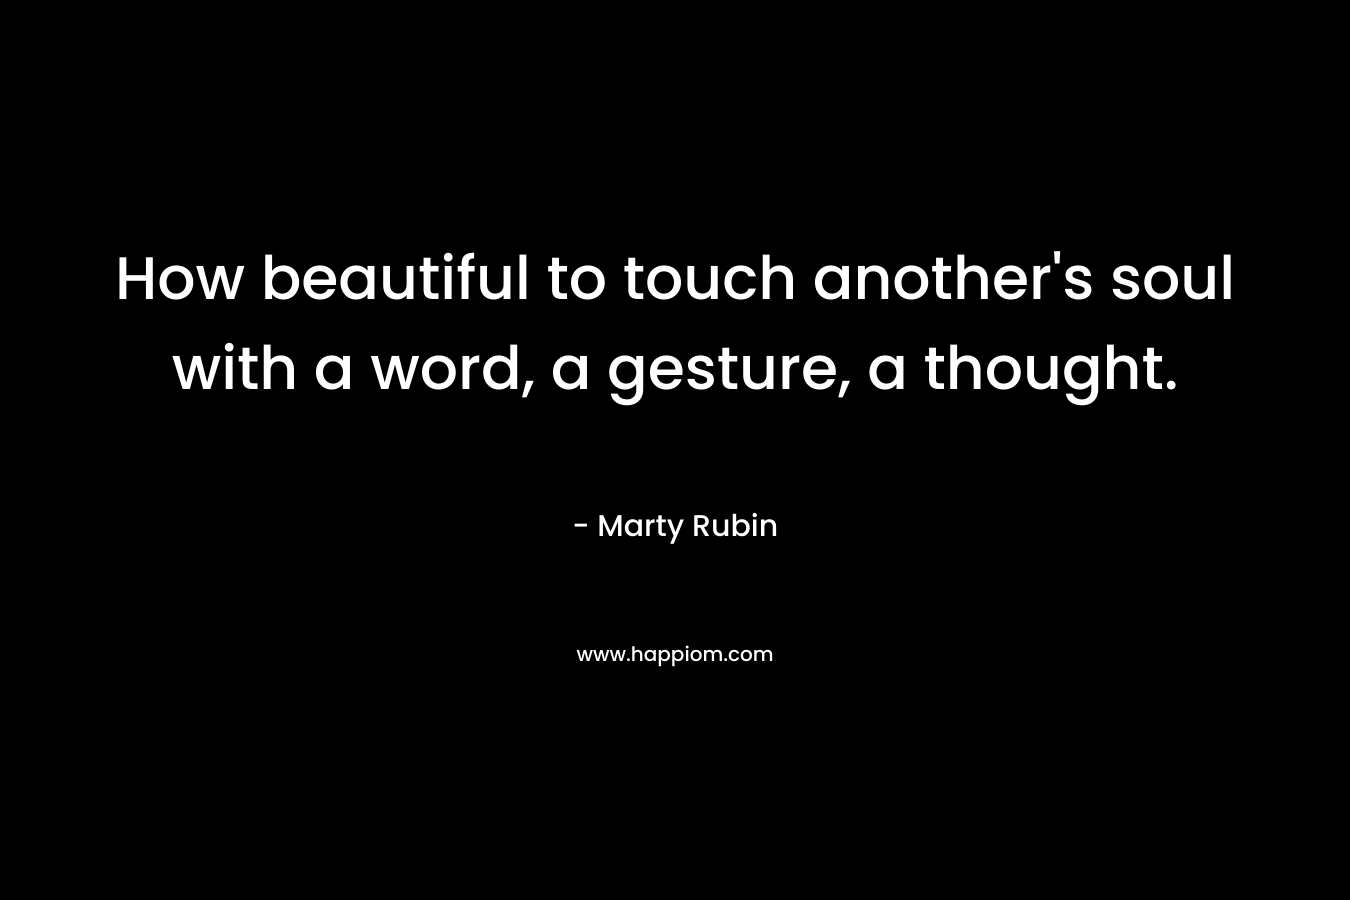 How beautiful to touch another's soul with a word, a gesture, a thought.